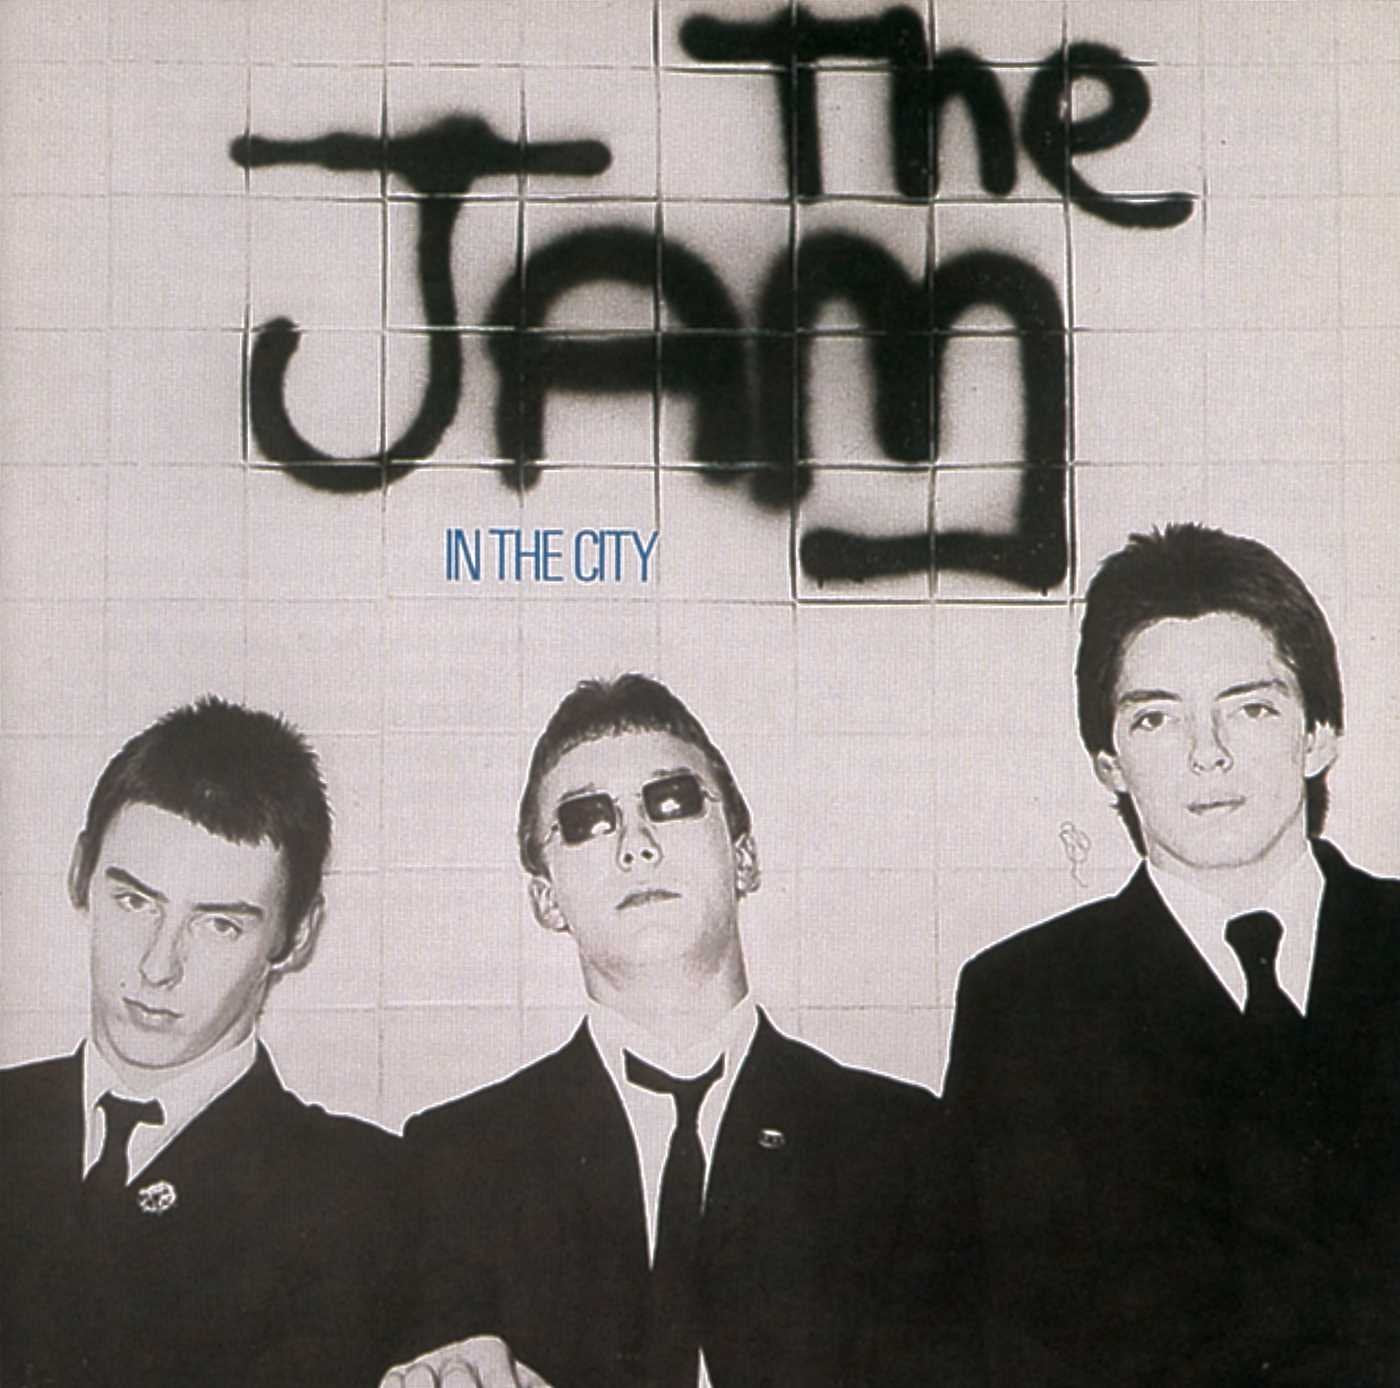 The Jam - In The City LP